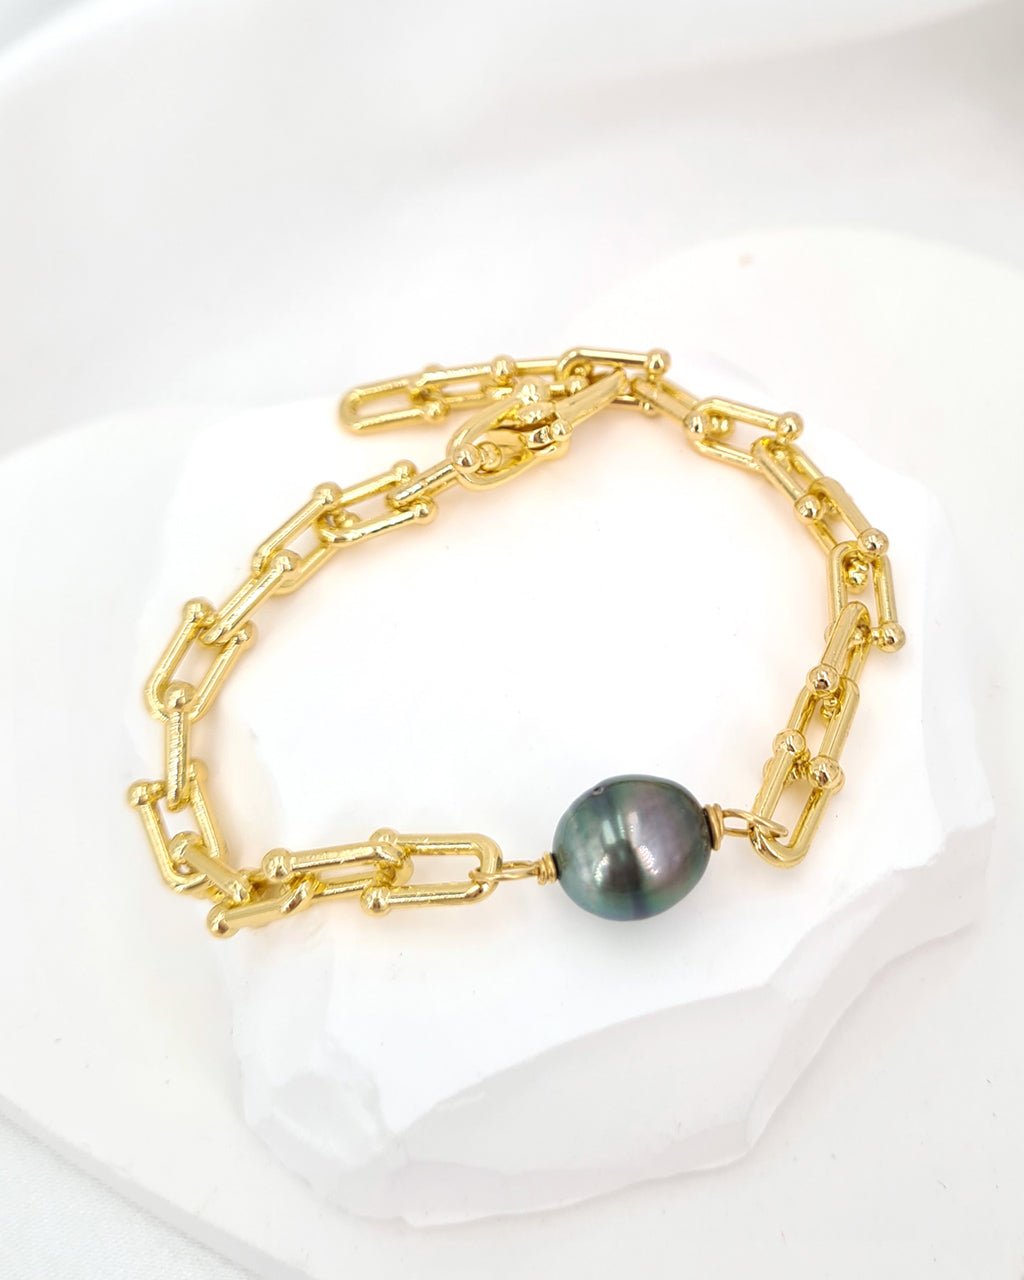 Tahitian Pearl Bracelet with Gold Horseshoe Link Chain